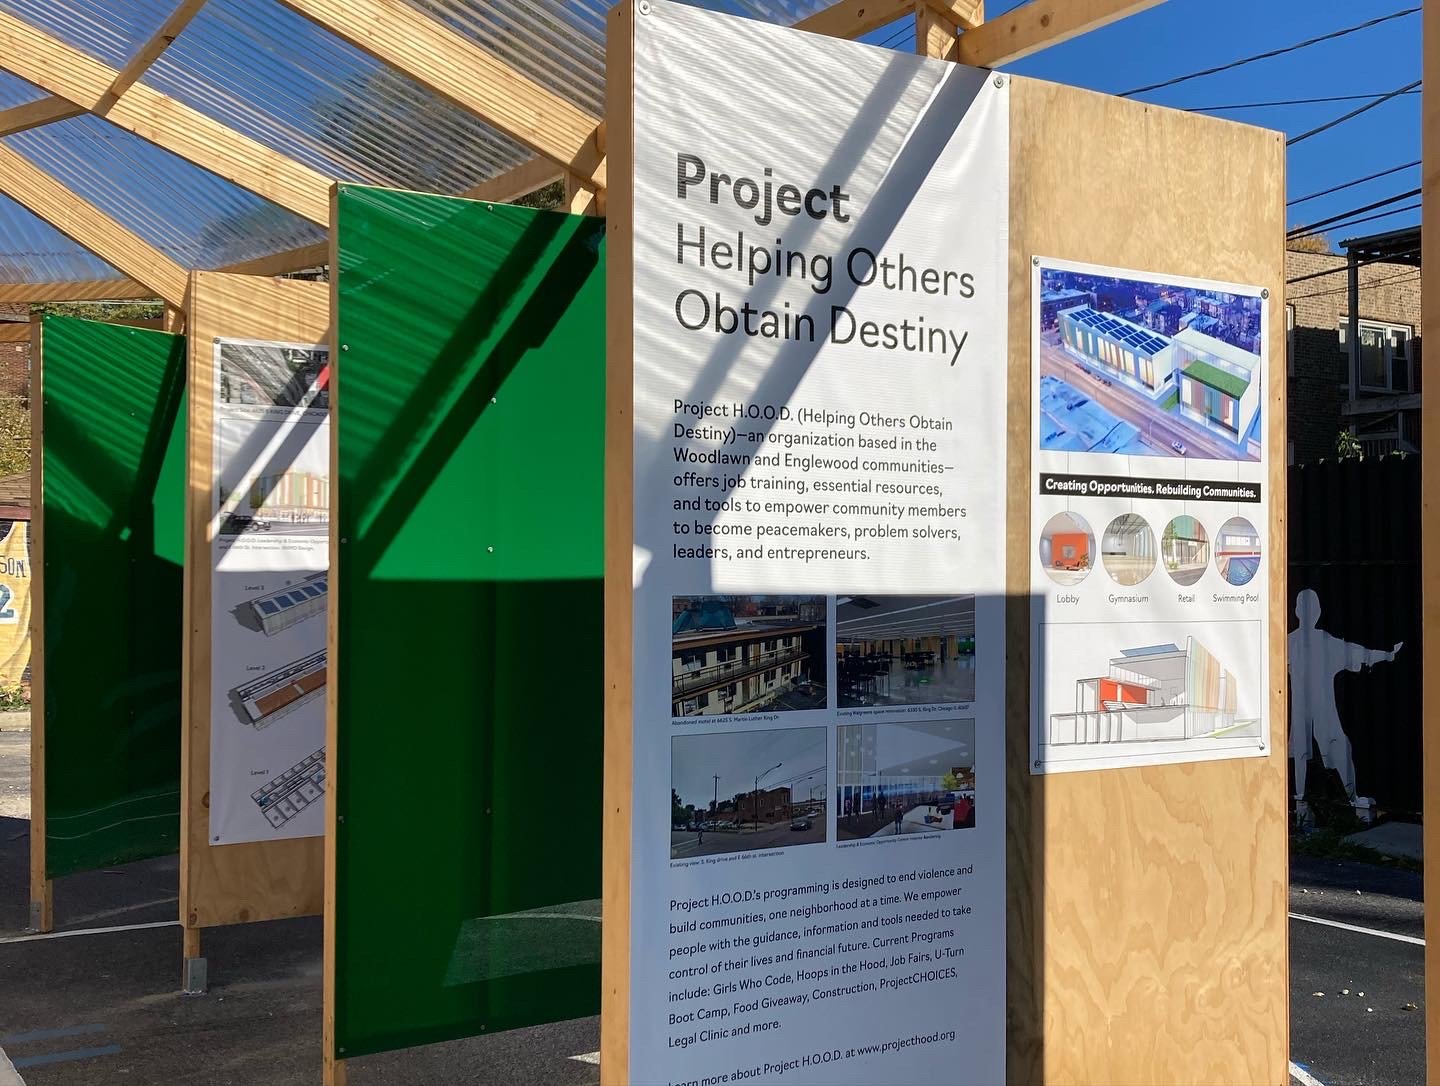 Exhibit Space About ProjectHOOD Mission – Future Plans